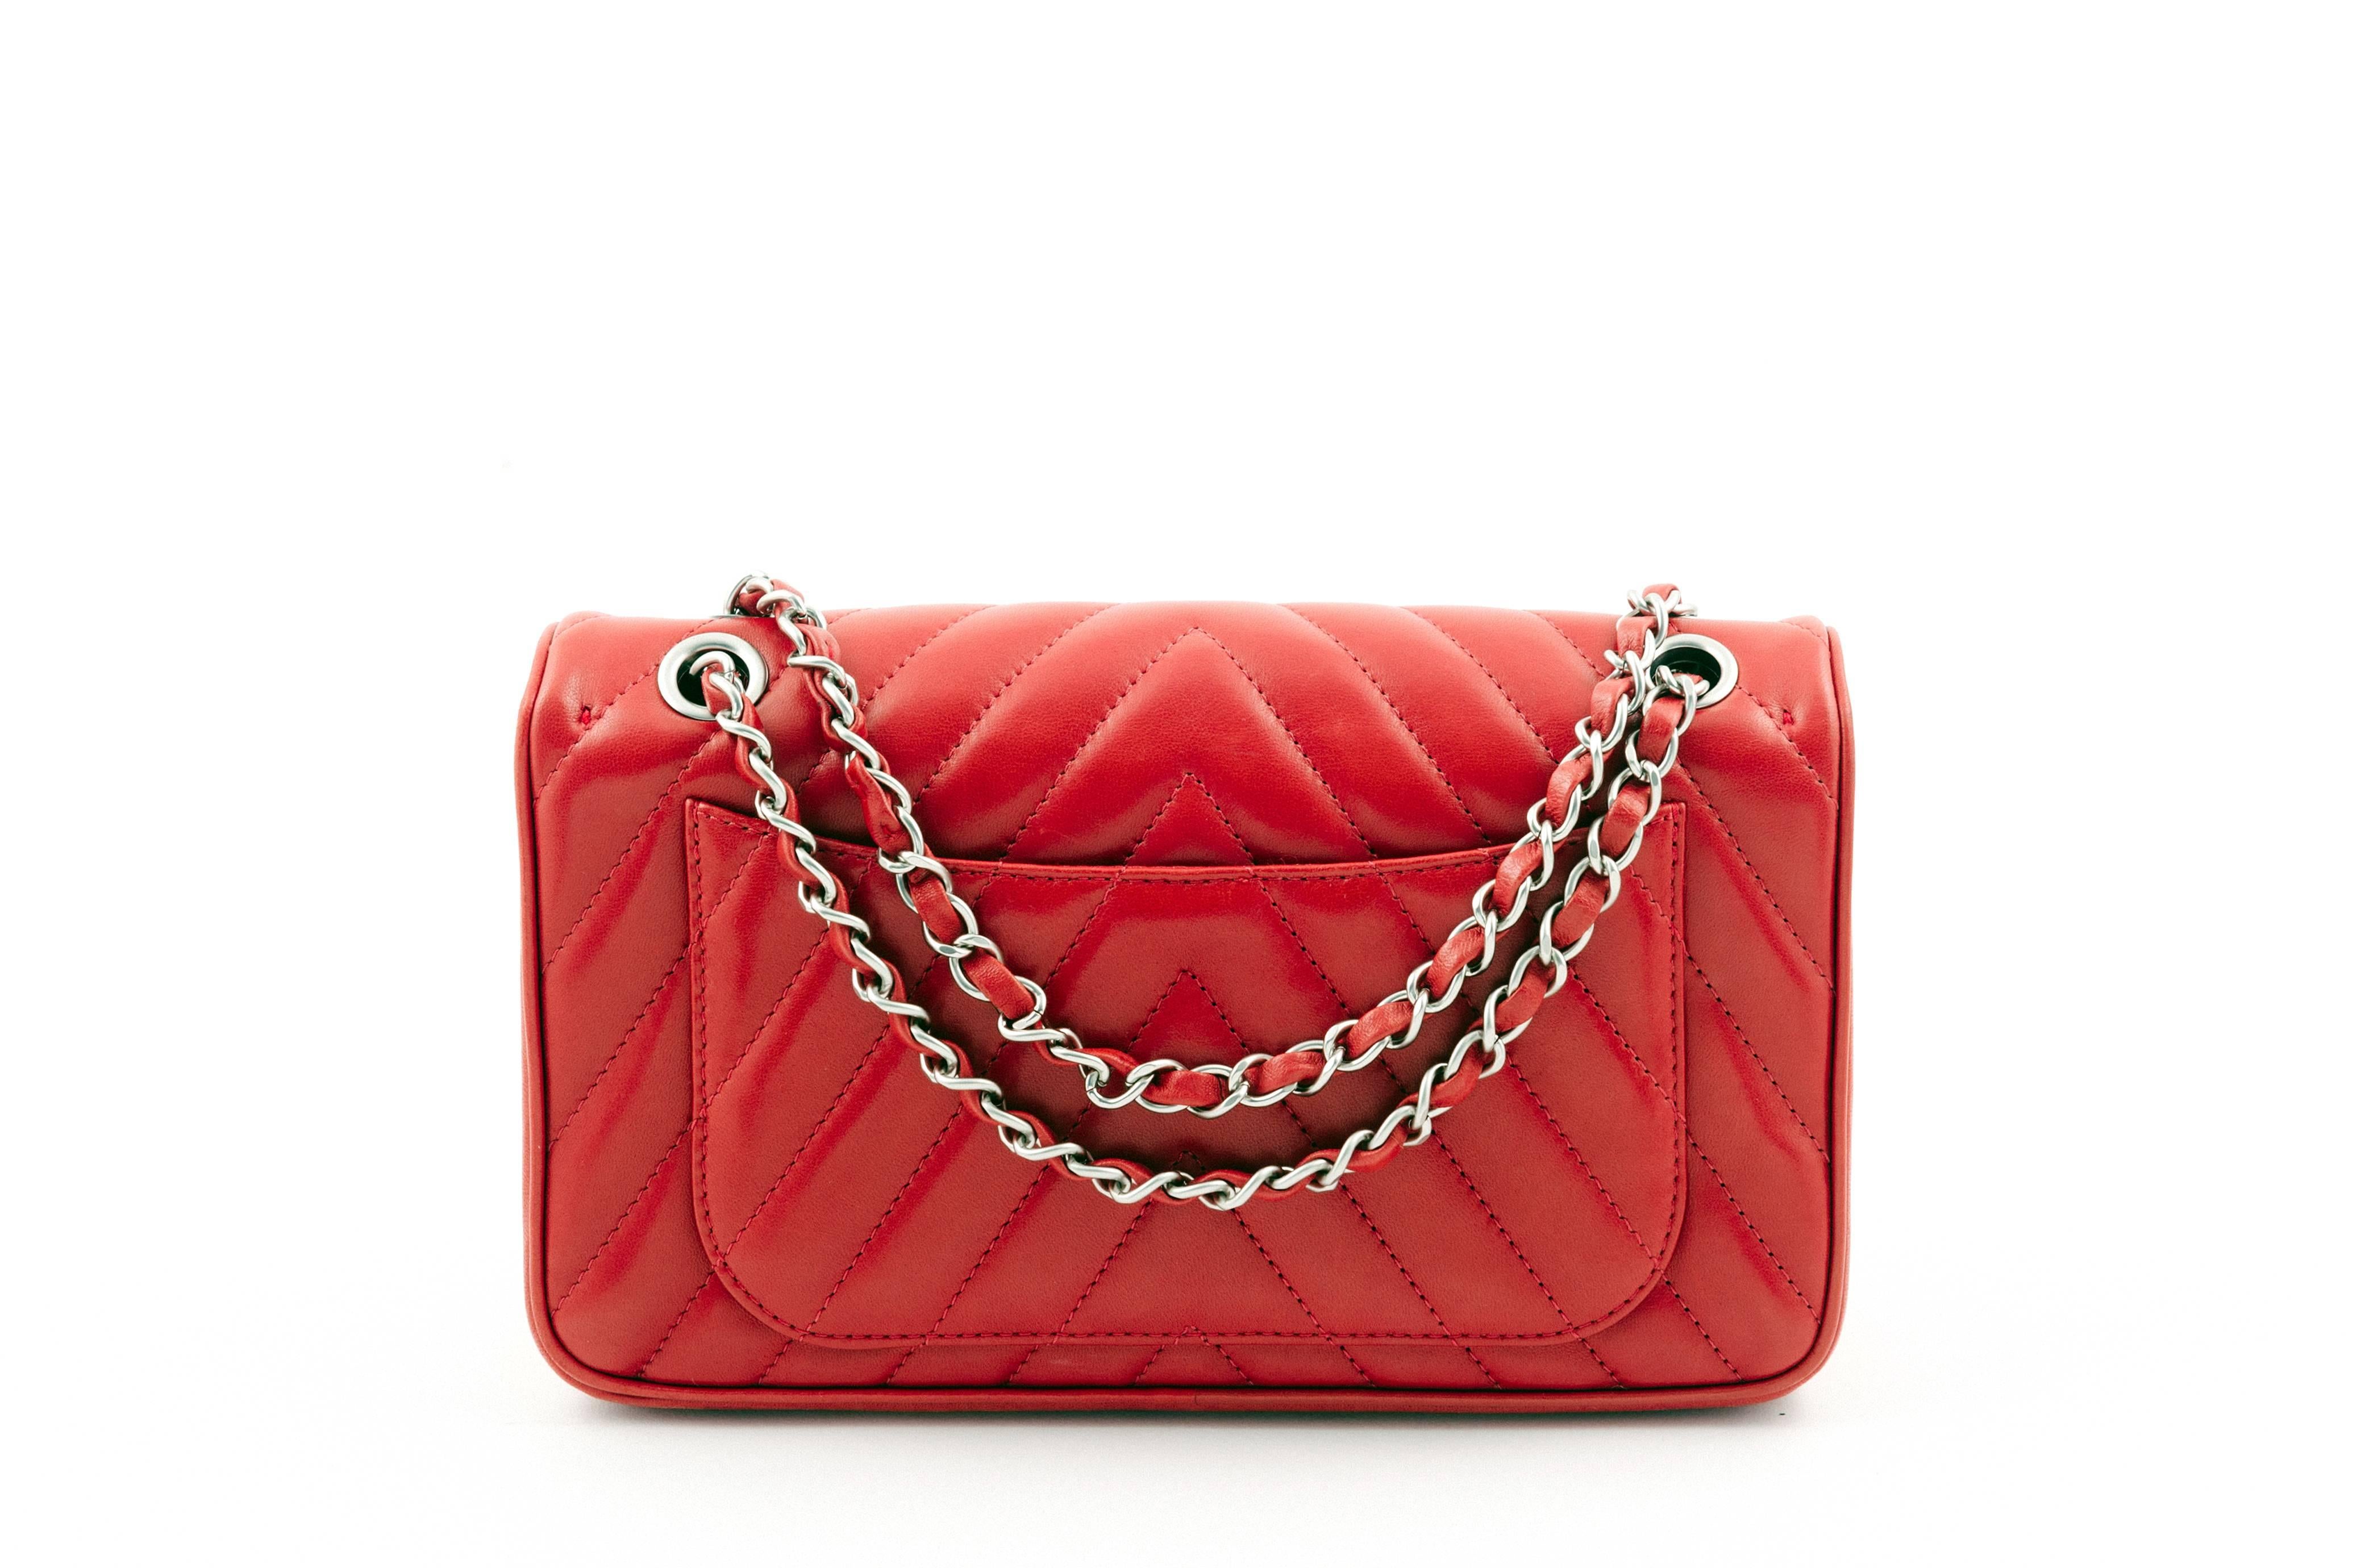 Chanel Quilted Leather Red with lion closure (25cm) with its dustbag, its card and its sticker; silver brushed tone hardware. Date code: 14672707. Model from 2010-2011. Excellent condition
